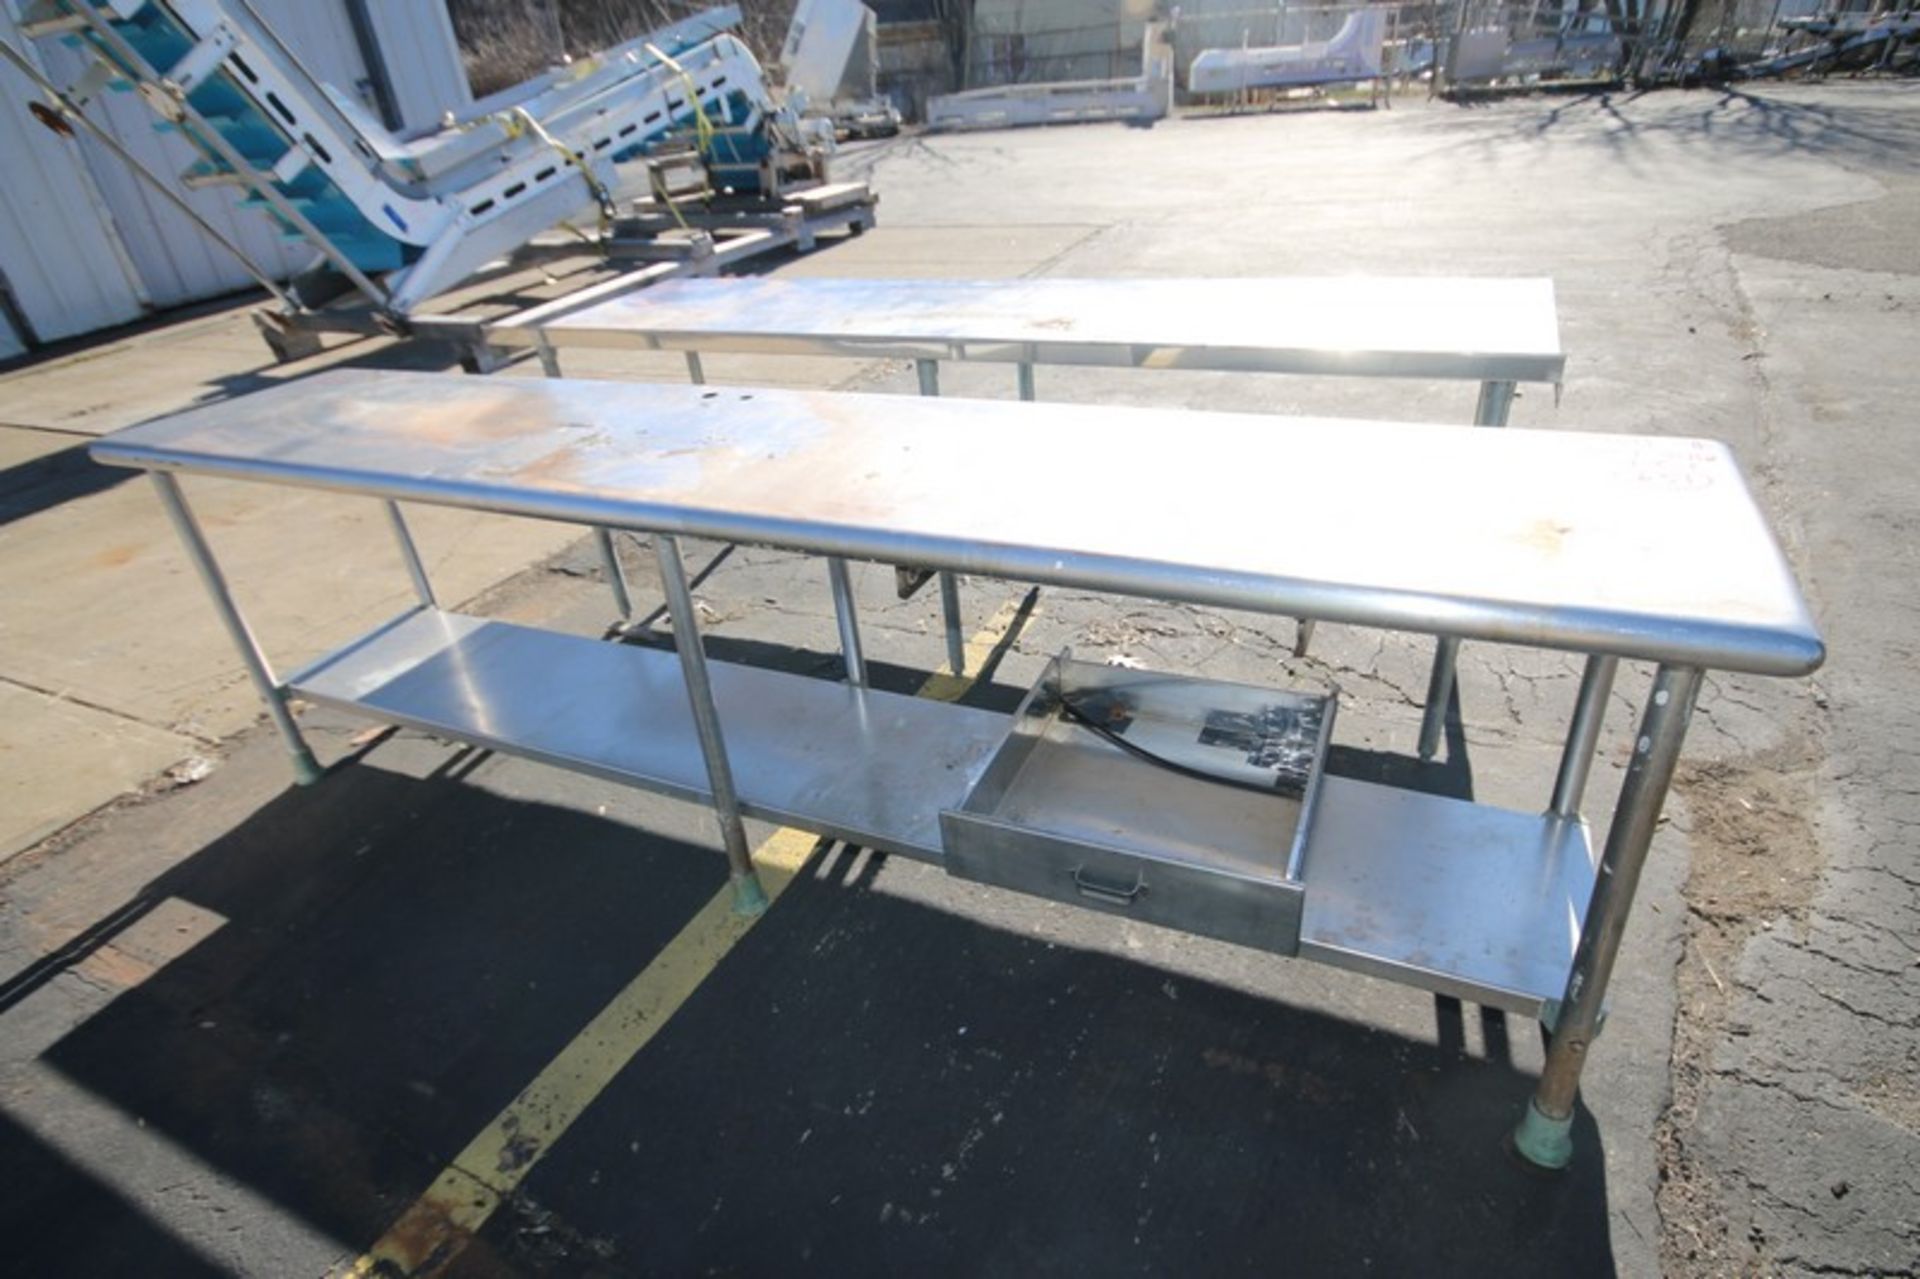 113" L x 23" W x 34" H S/S Table (INV#101787) (Located @ the MDG Auction Showroom in Pgh., PA) (